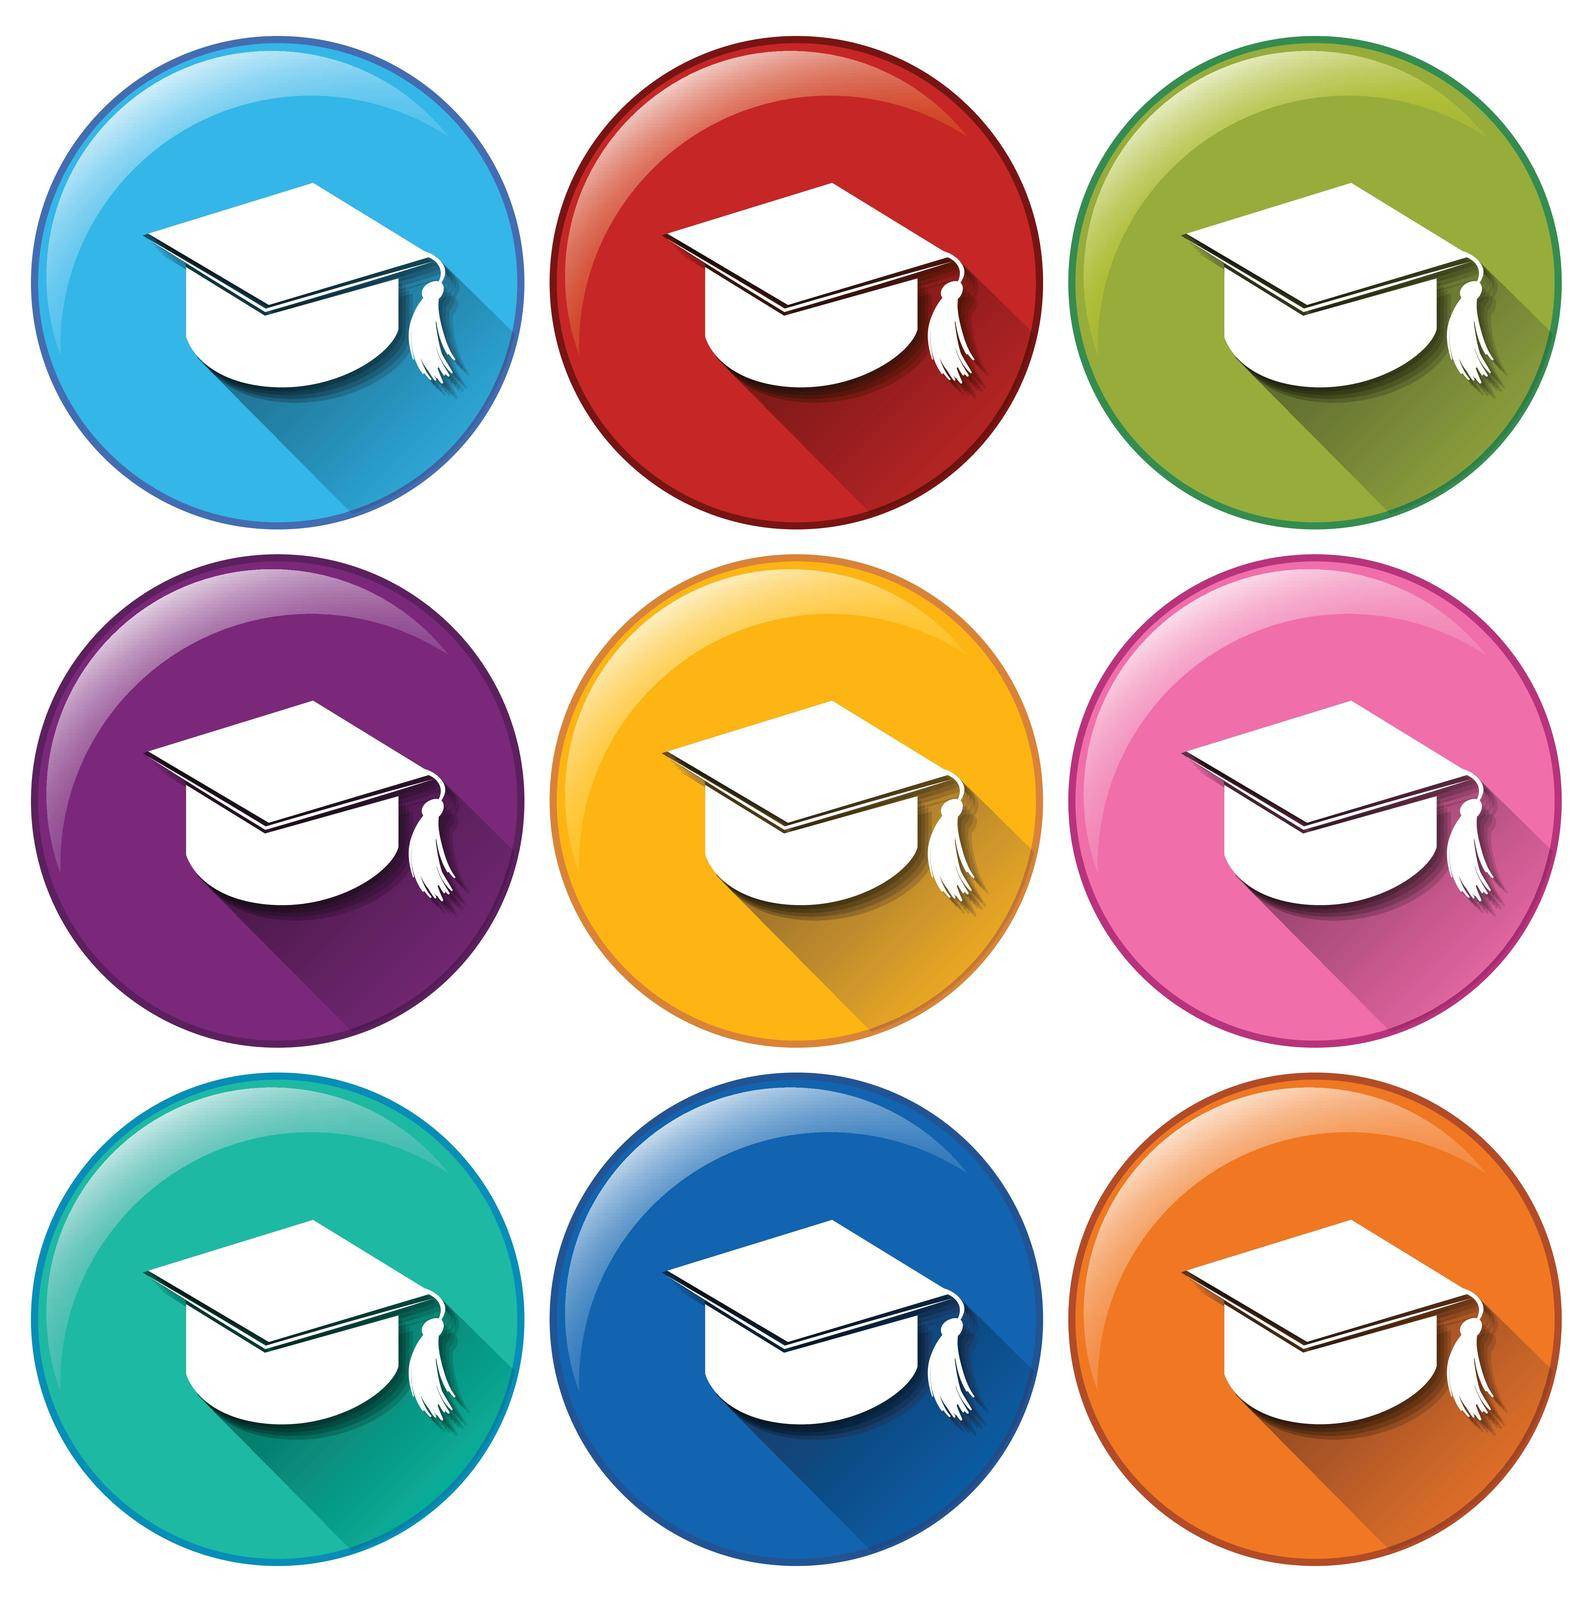 Illustration of the graduation cap icons on a white background